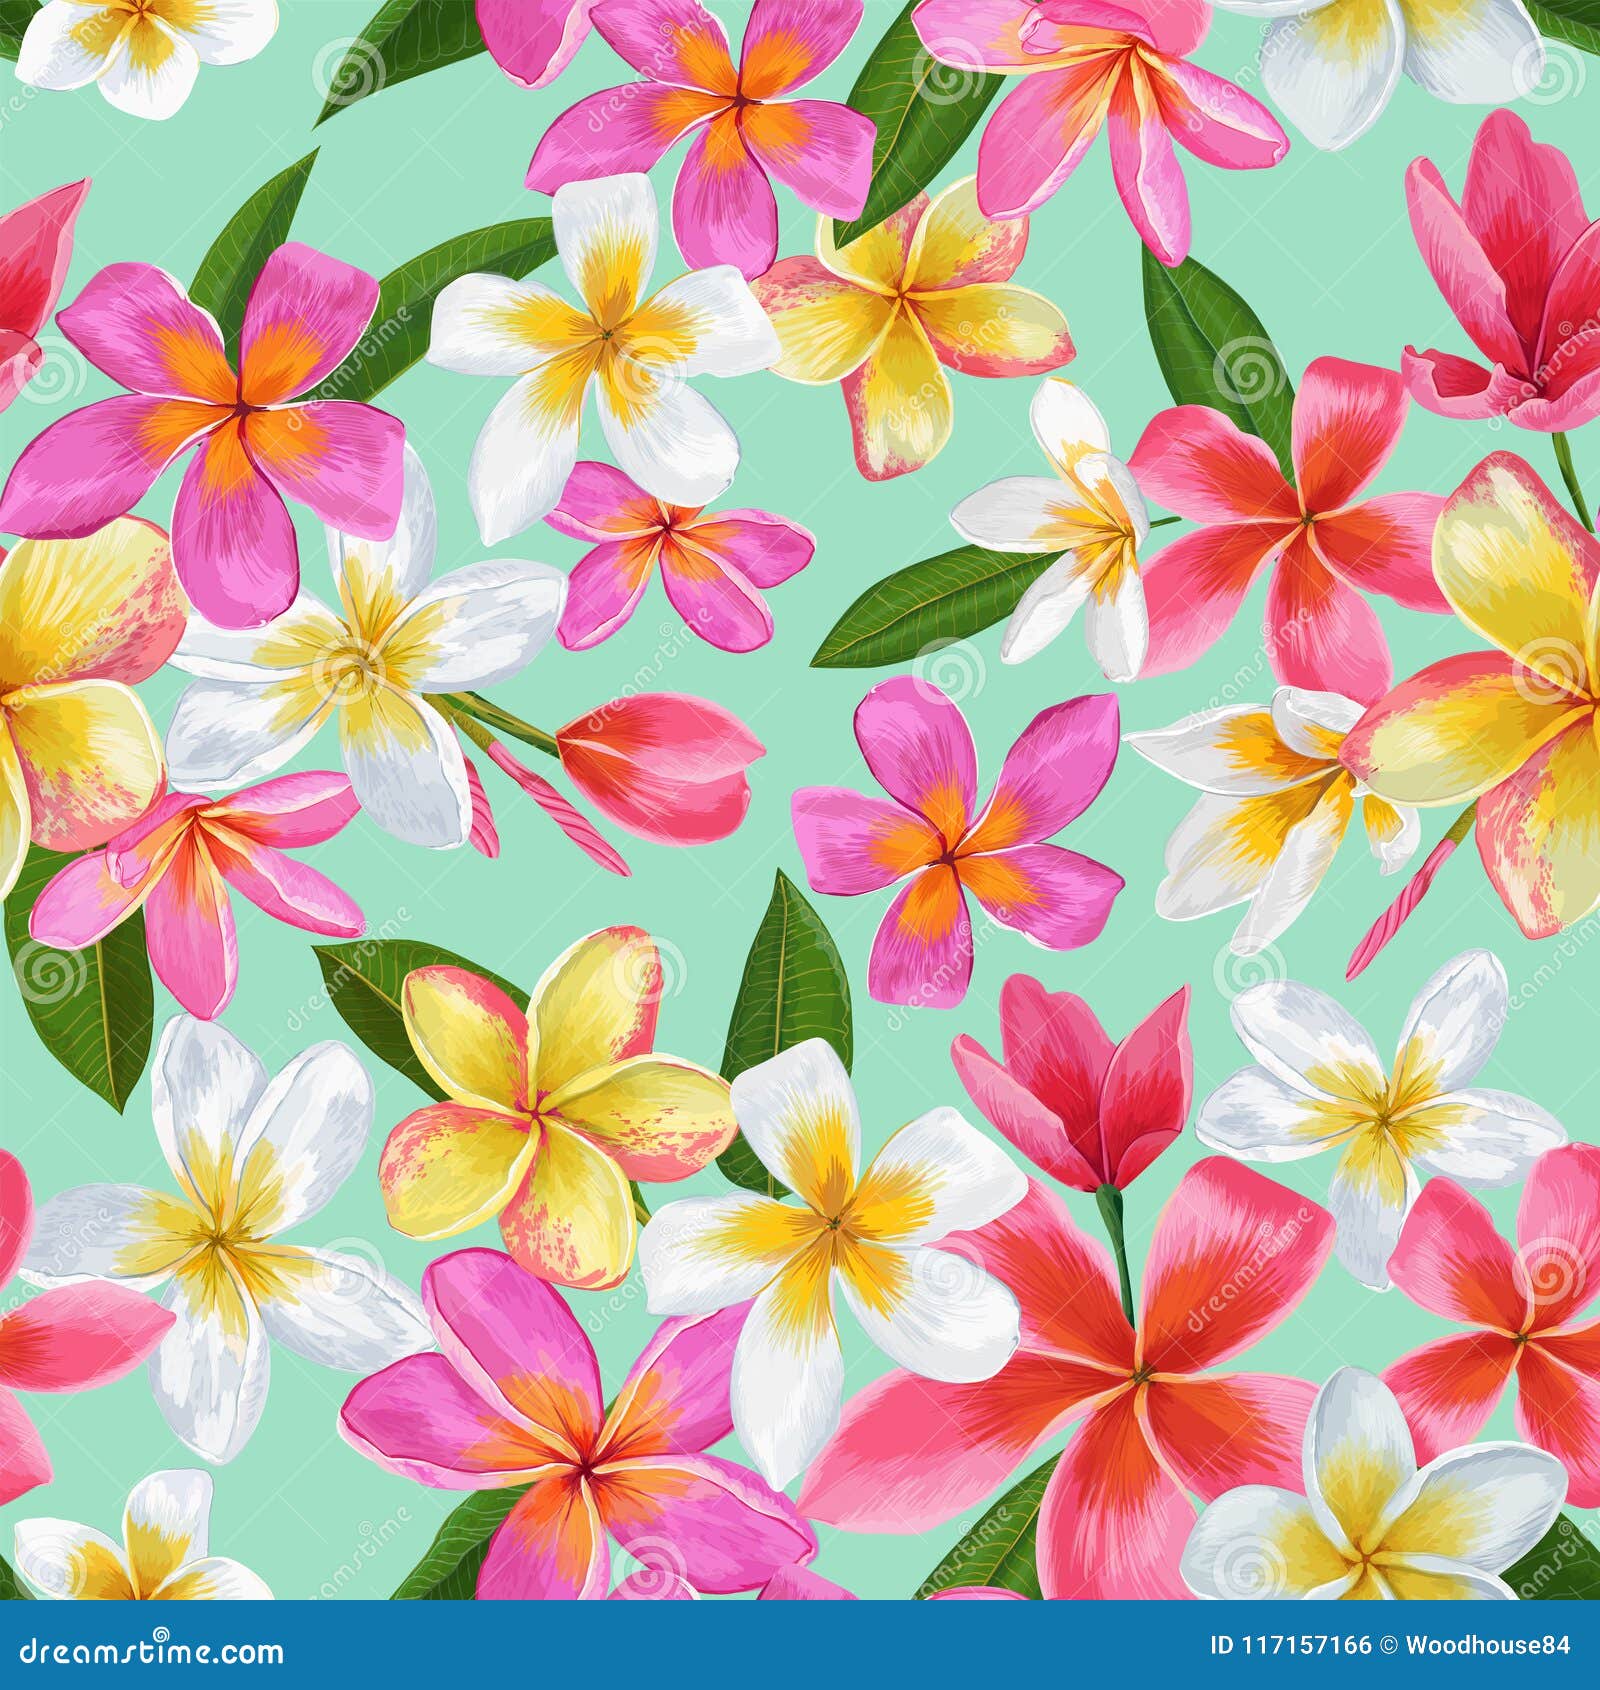 watercolor tropical flowers seamless pattern. floral hand drawn background. exotic plumeria flowers  for fabric